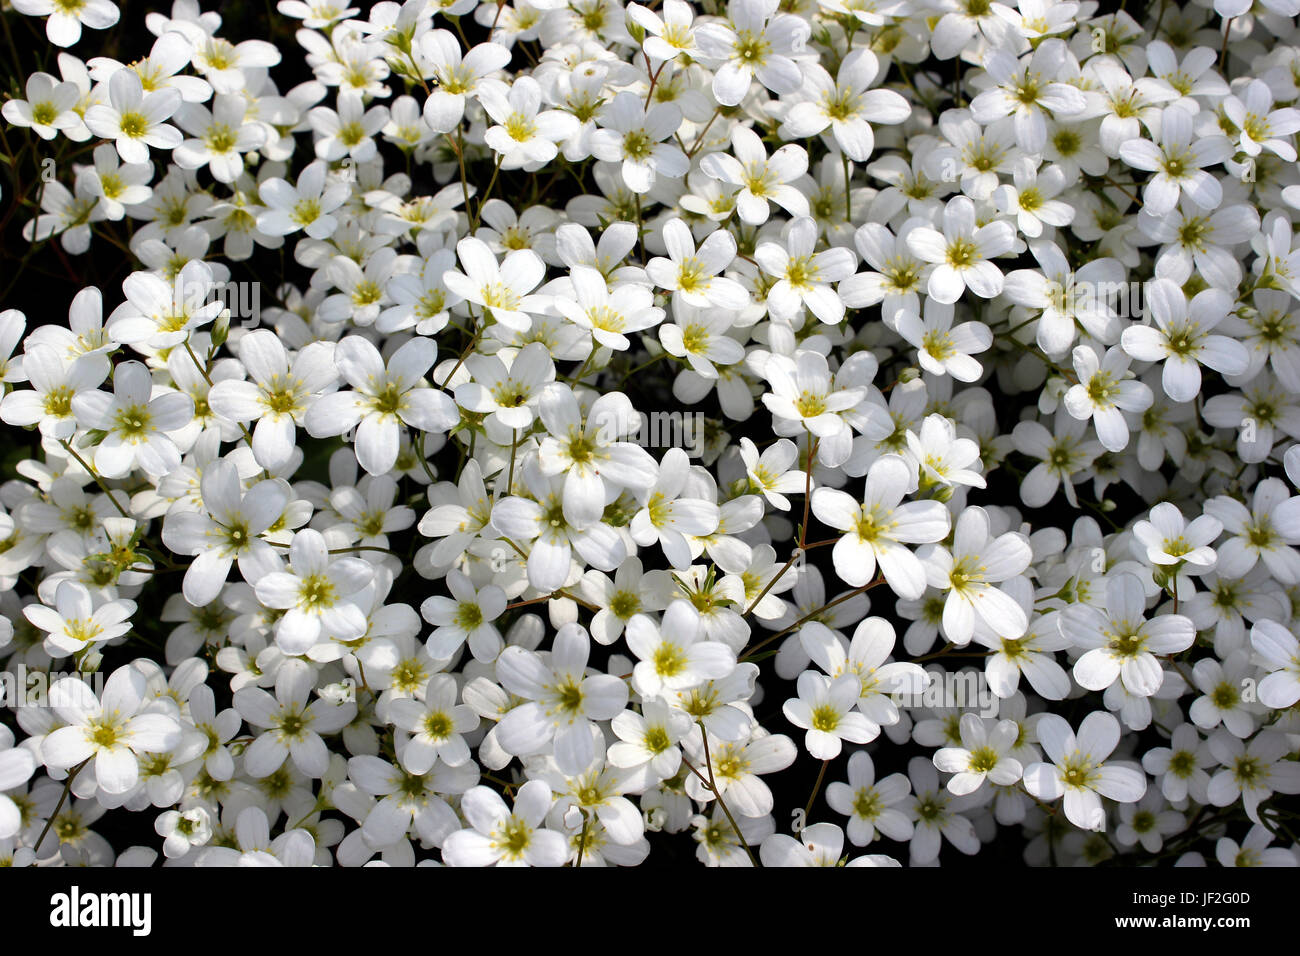 Saxifrage plant with a mass of white flowerheads Stock Photo